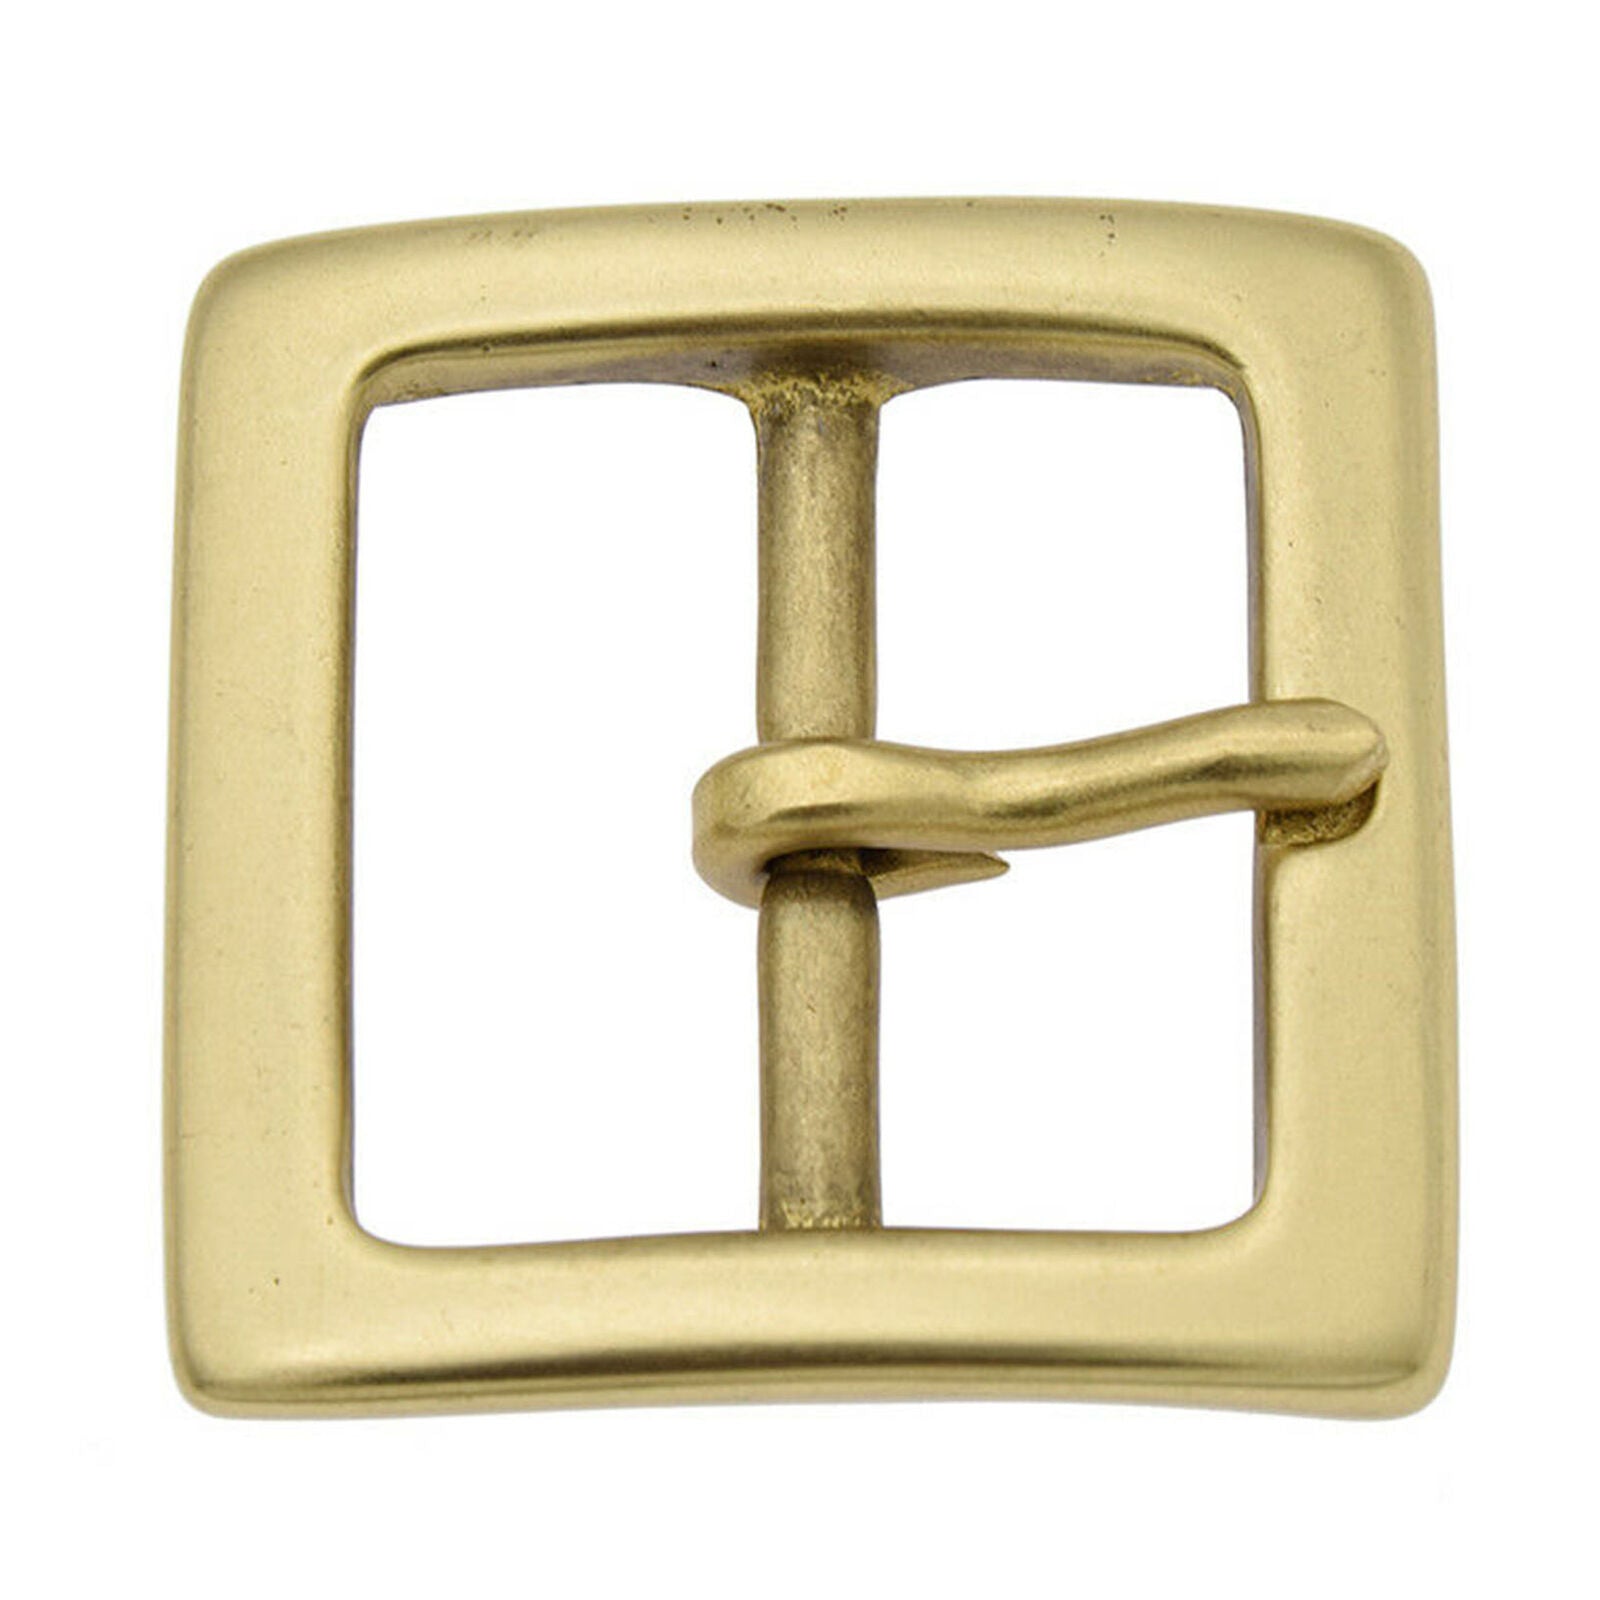 1x Polished Solid Brass Belt Buckle For 1.5inch Wide Belt Replacement Accessory